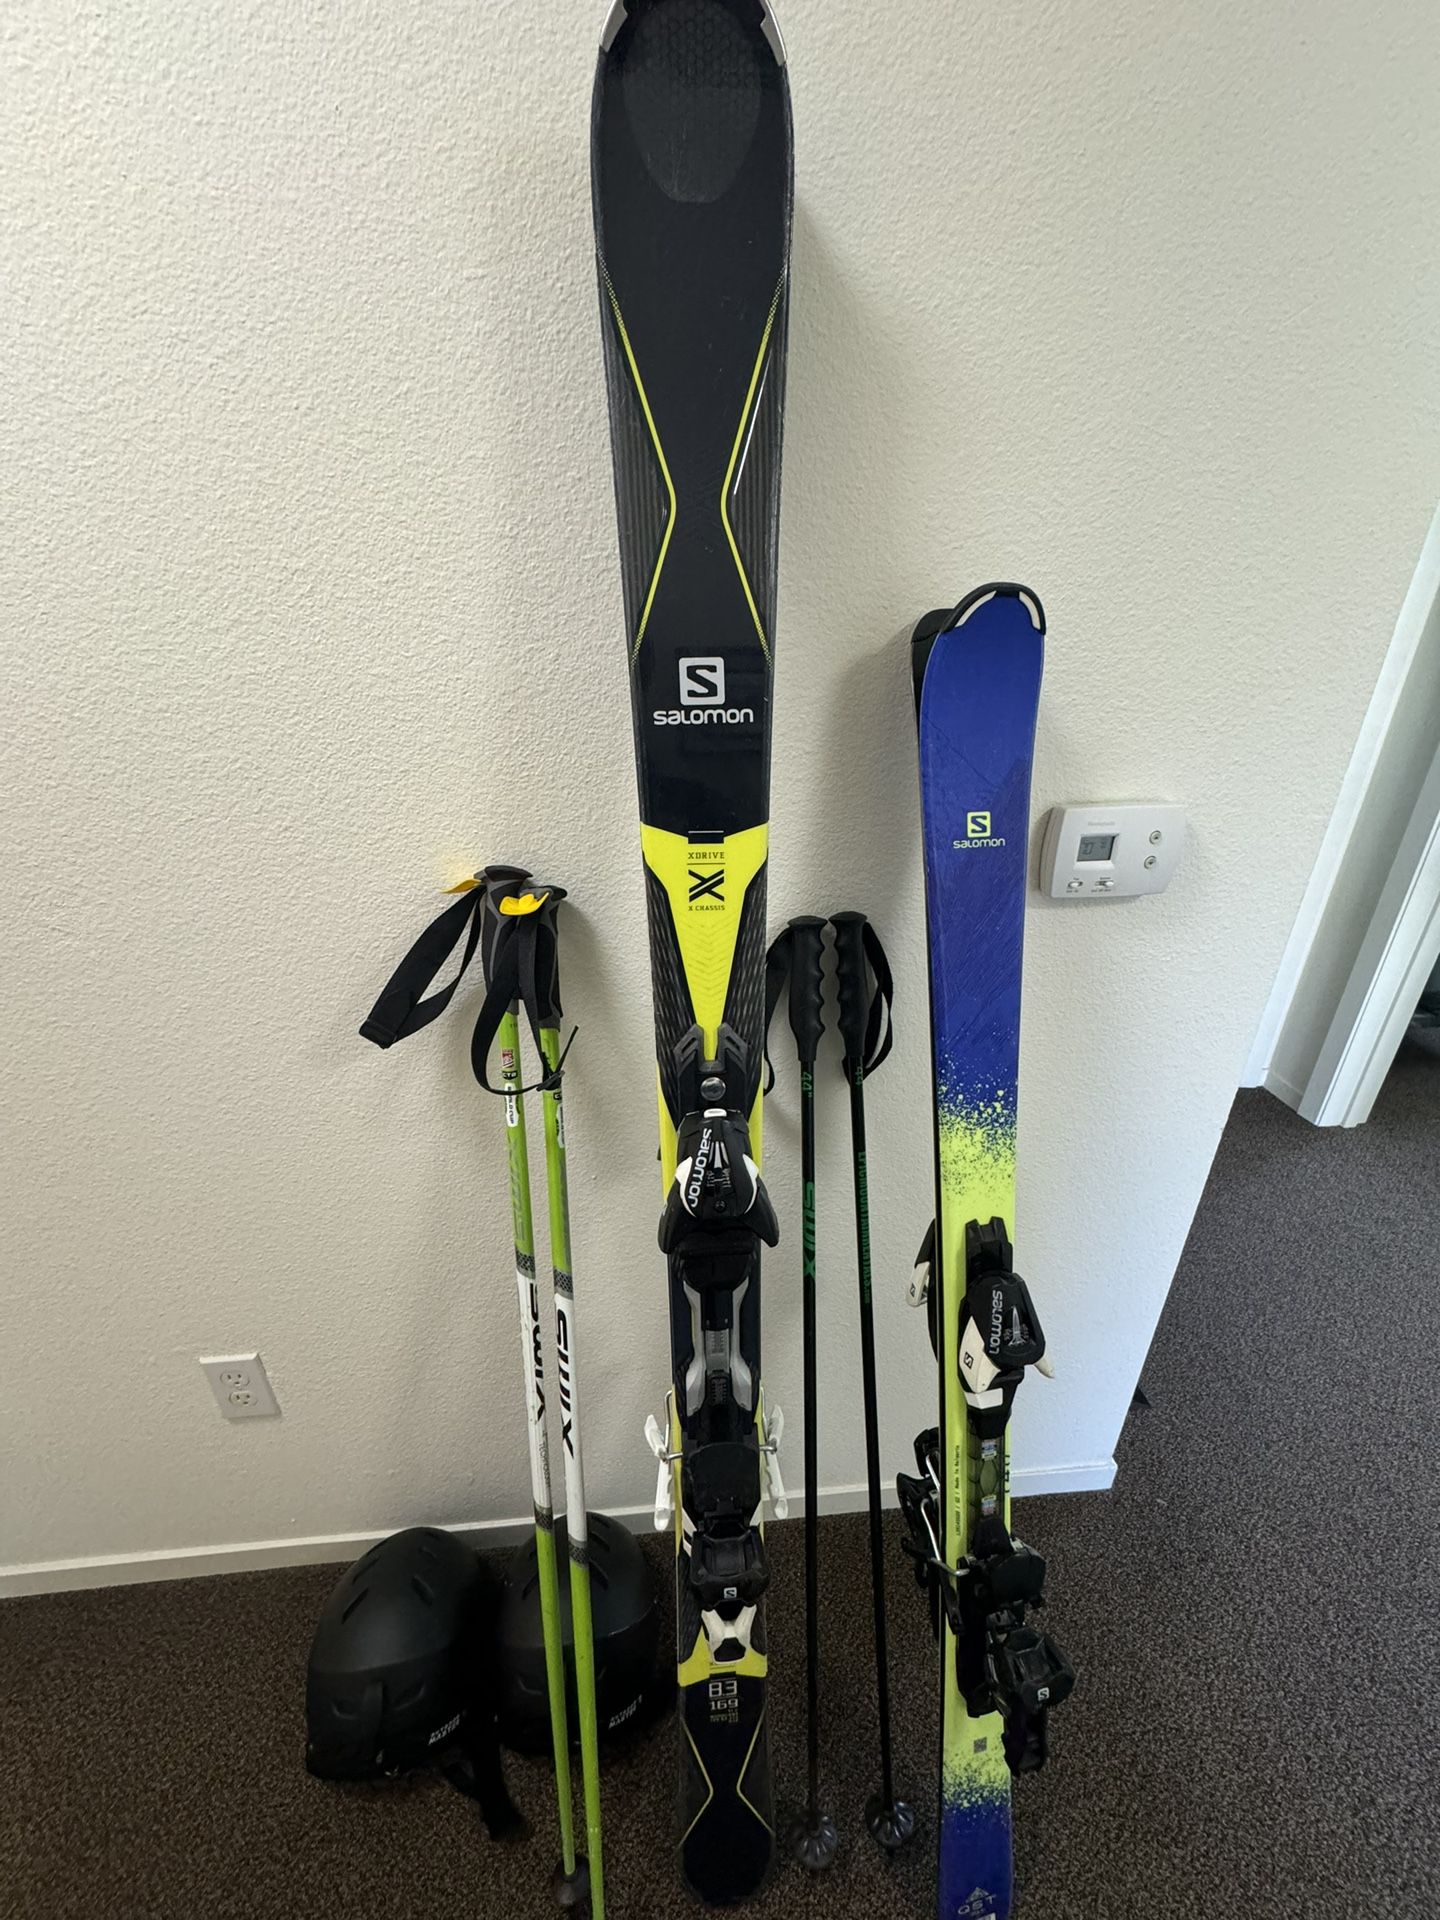 Skis Poles And Helmets